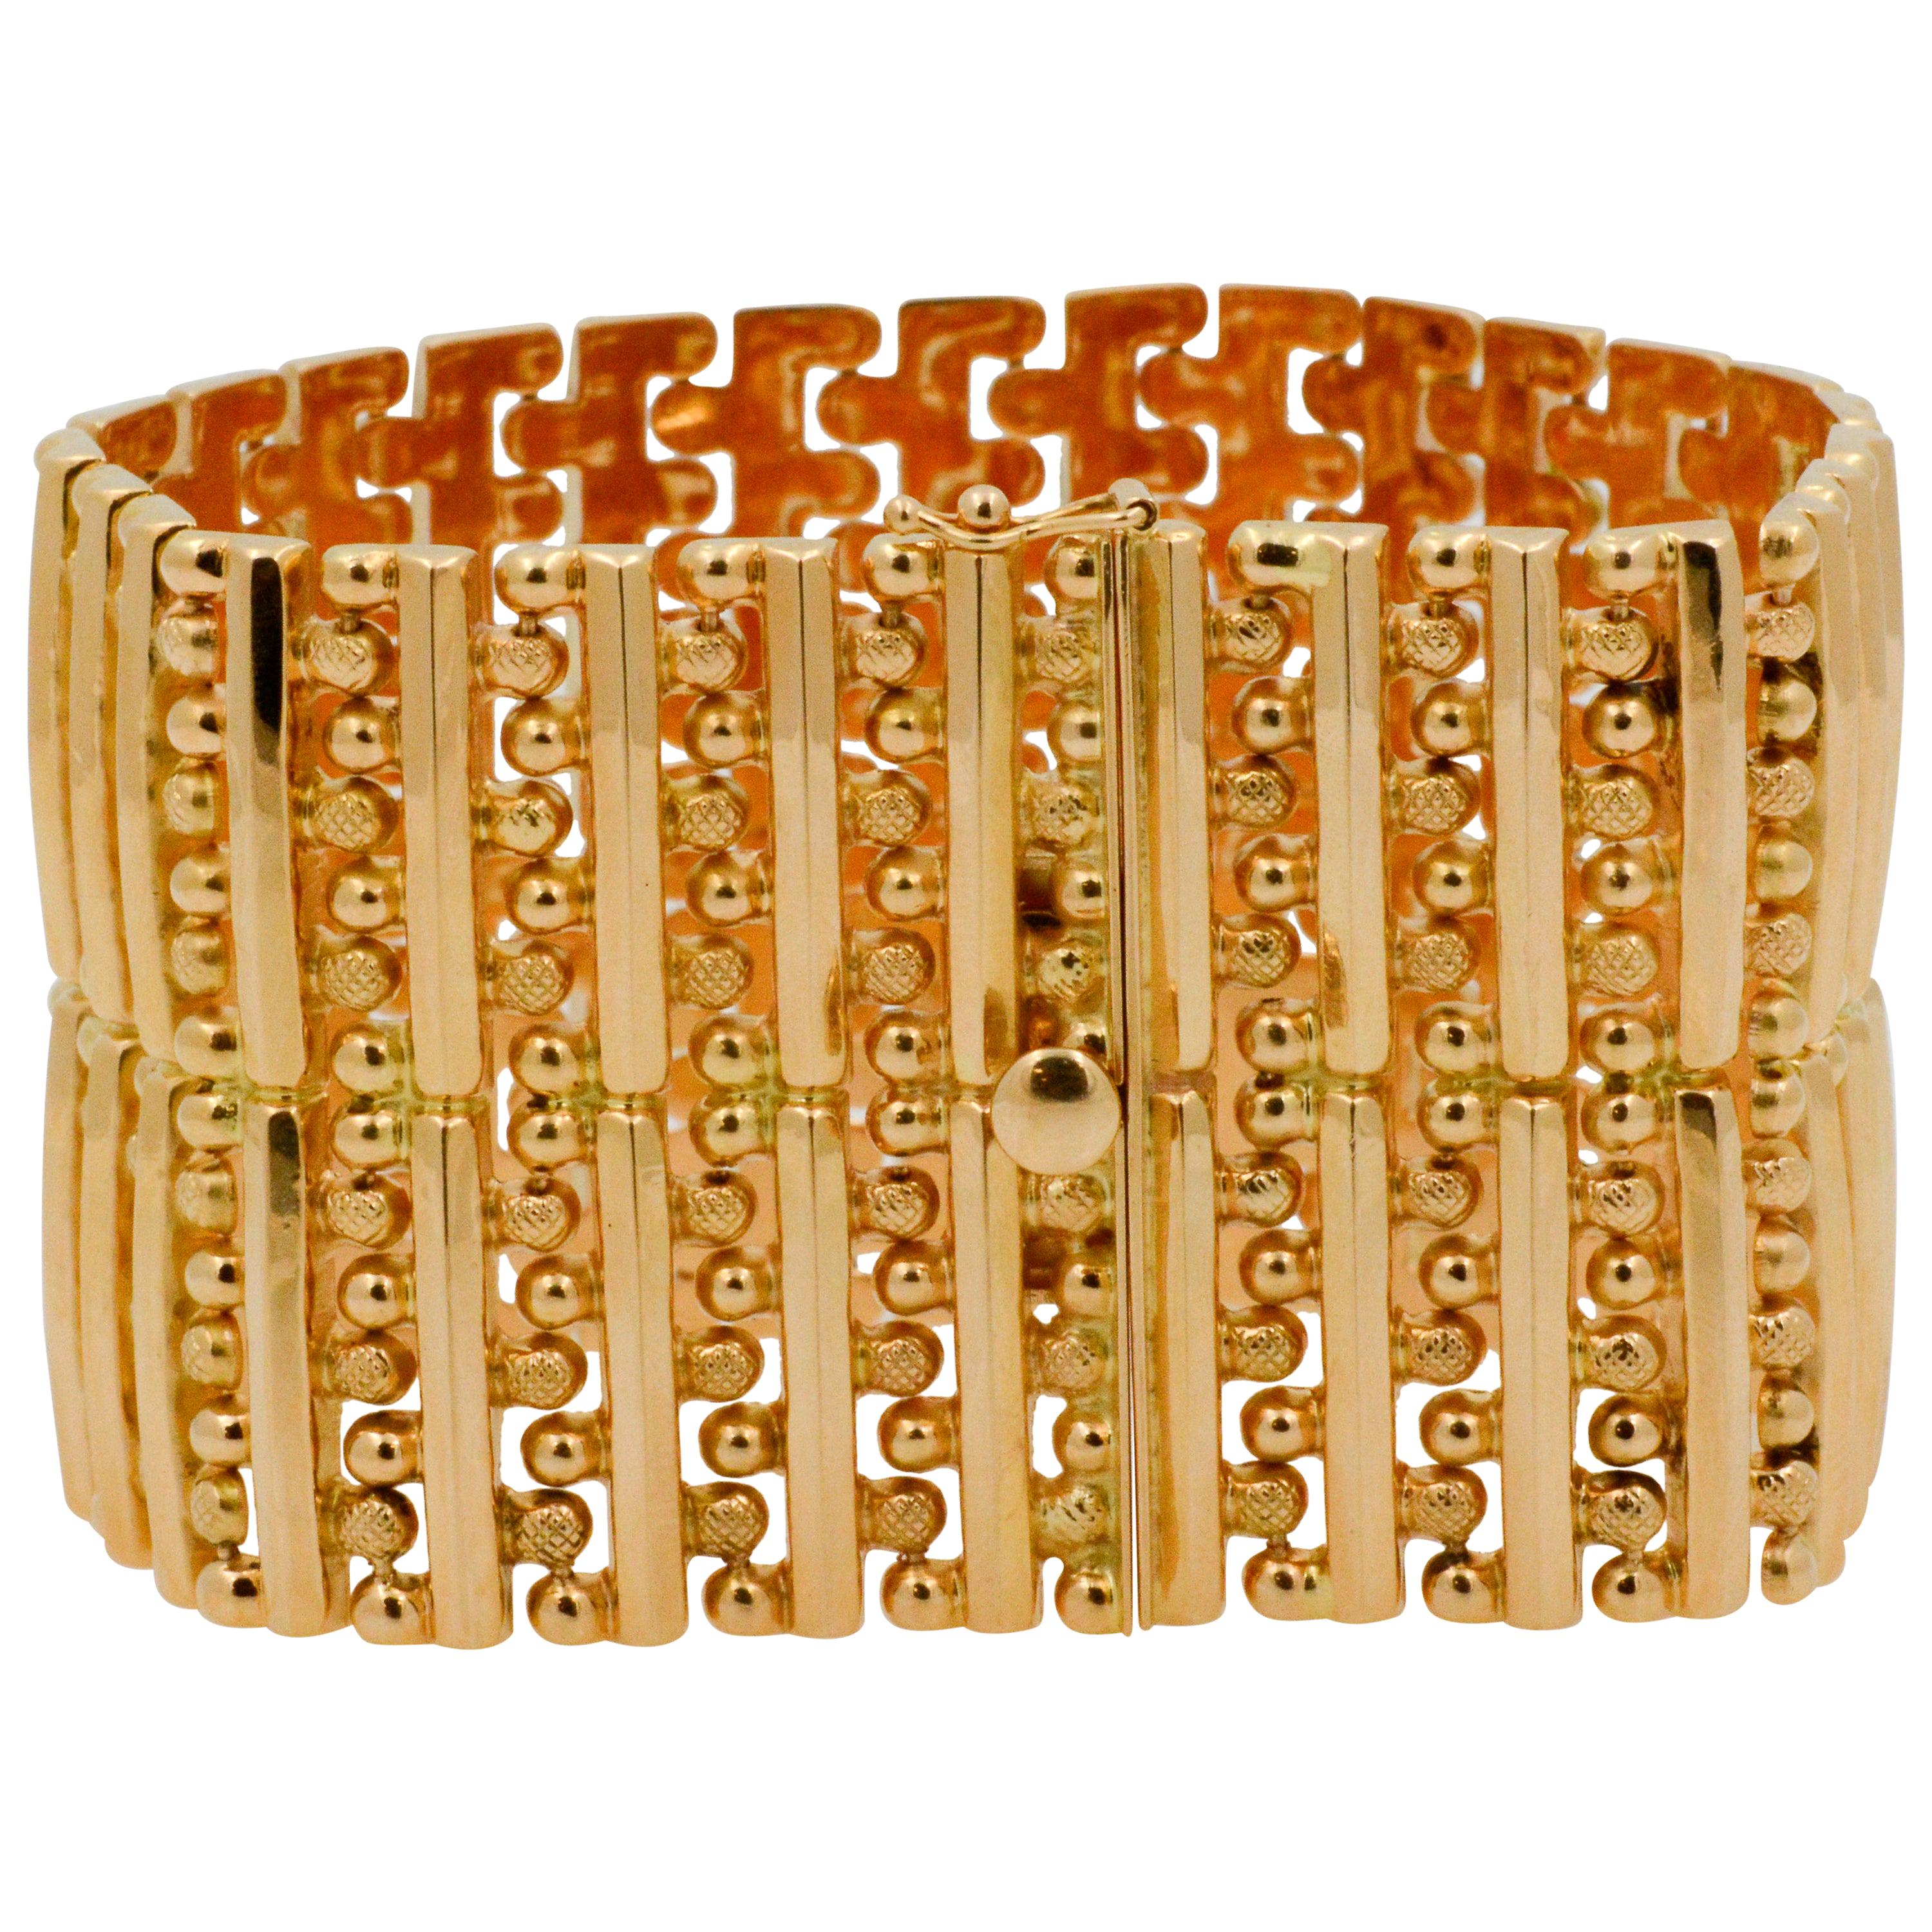 This retro bracelet showcases a 1 and 5/8” wide two row 18k yellow gold band with 29 polished bars and polished beads. The back of the bracelet is polished with a puzzle pattern and is 7.5” long. 